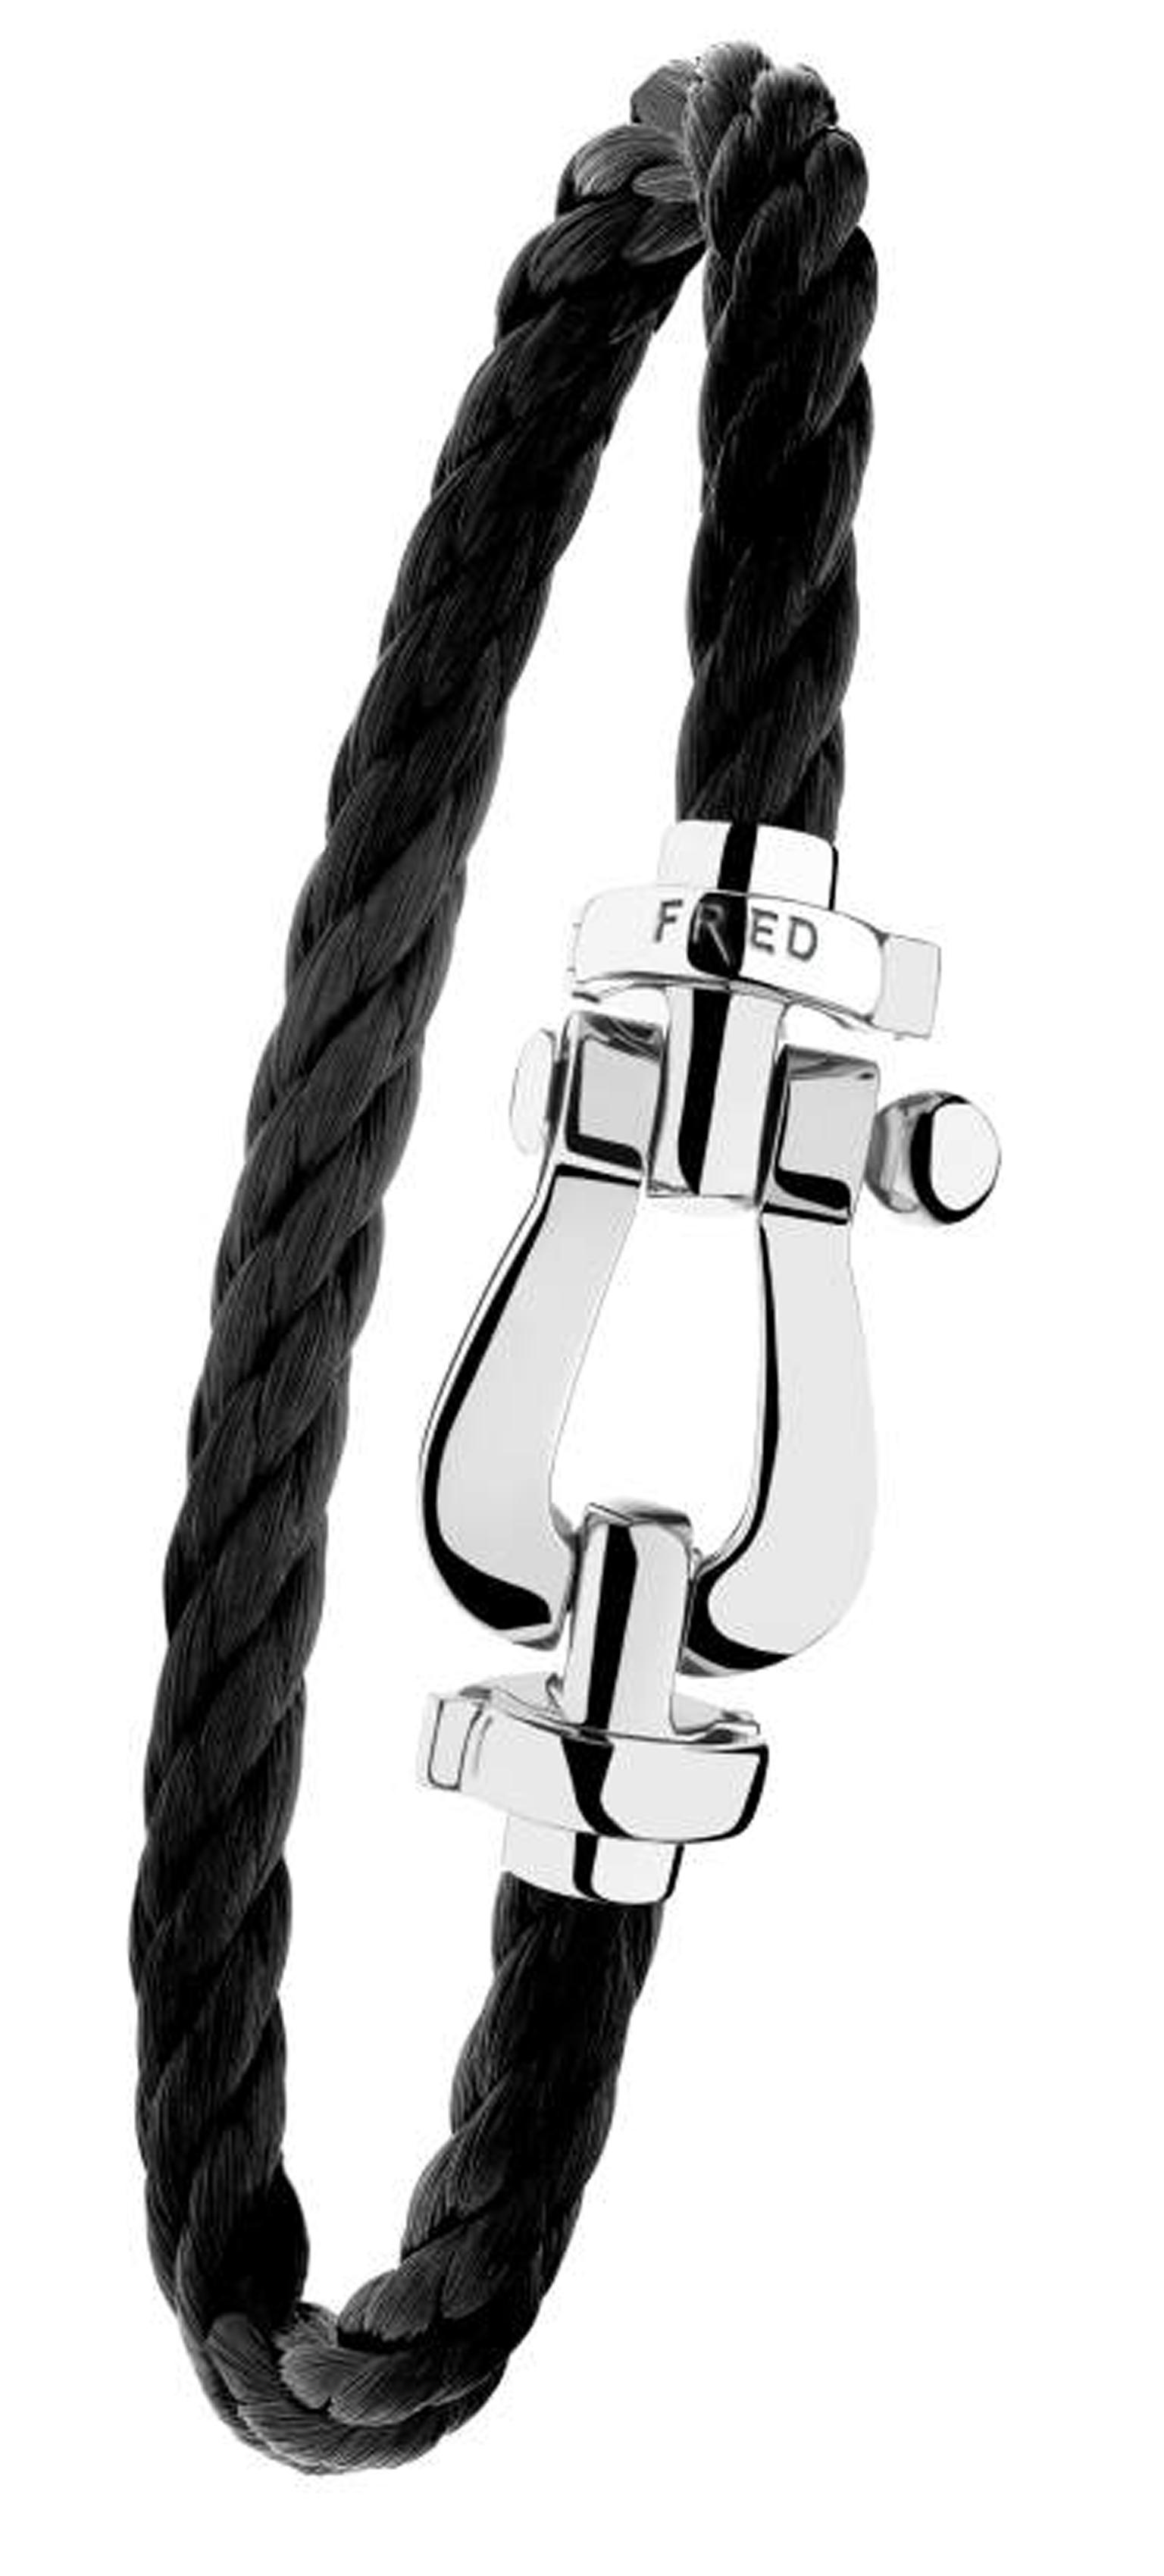 Fred Force 10 Bracelet 402325 | Collector Square